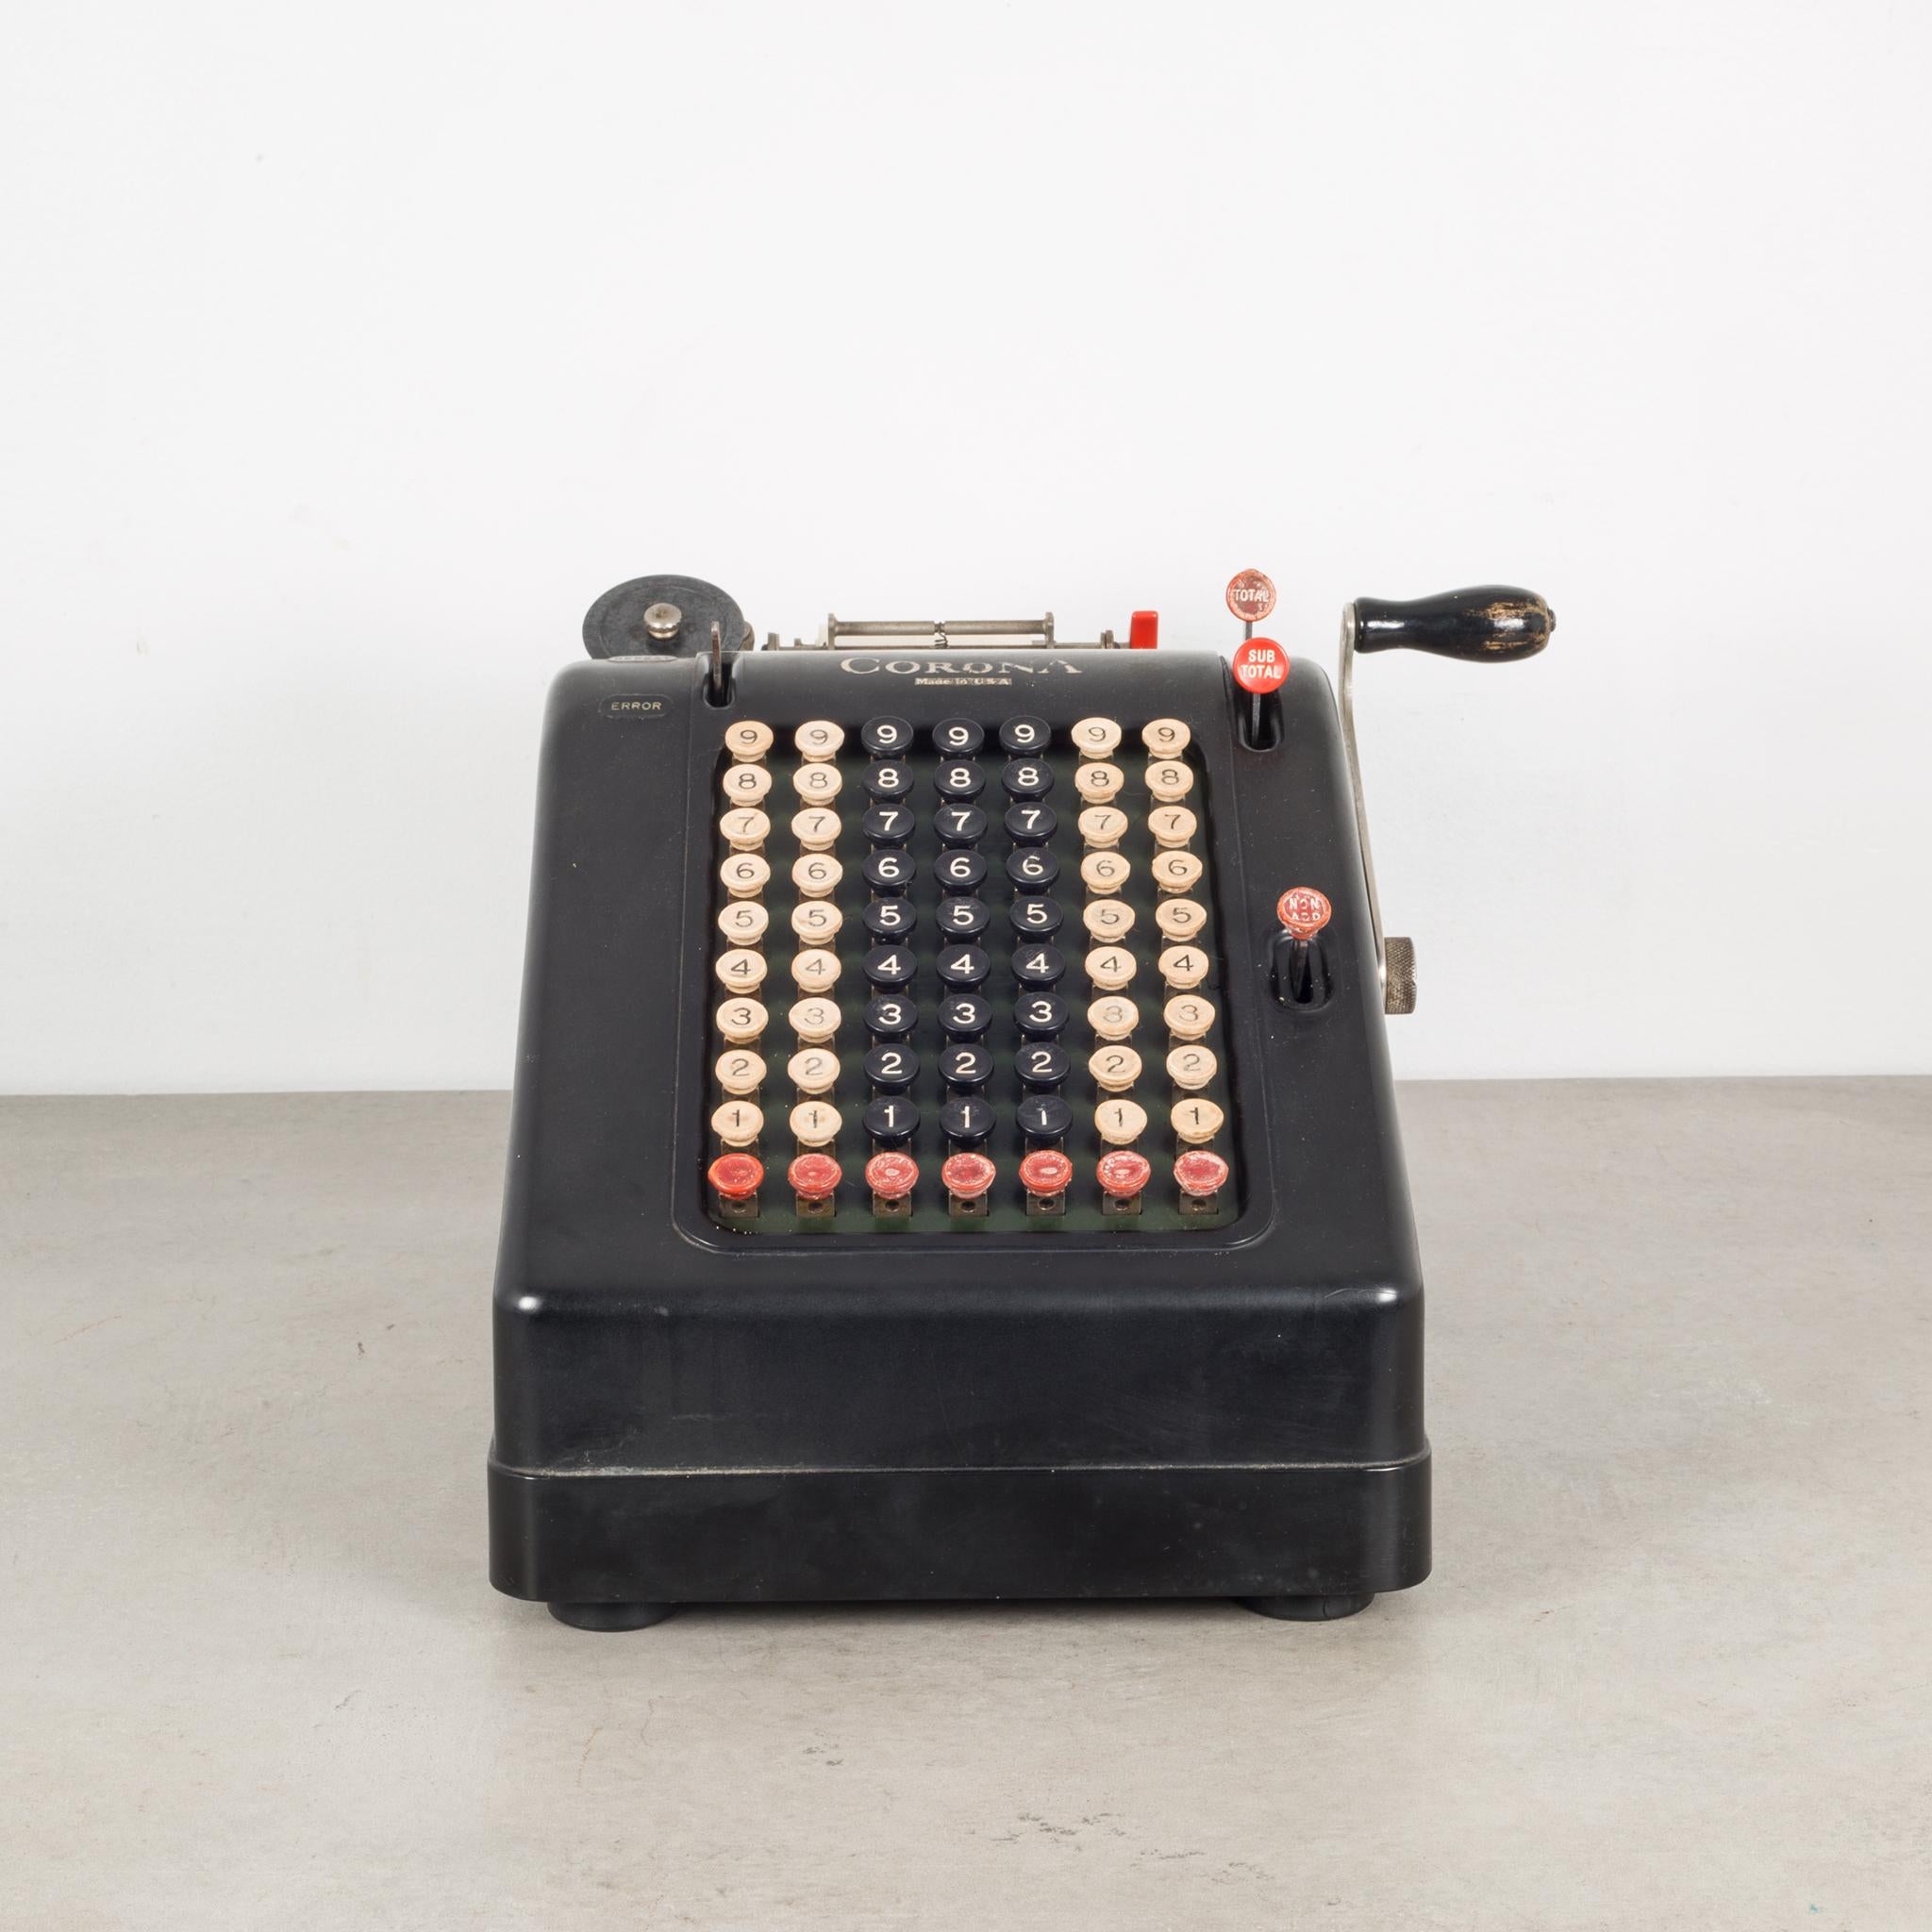 About
The is an antique metal and bakelite adding machine by Corona. The body is Bakelite, metal, and wood on the handle. The lever pulls forward and back working the inner mechanisms but doesn't print on the paper. The black, white and red push